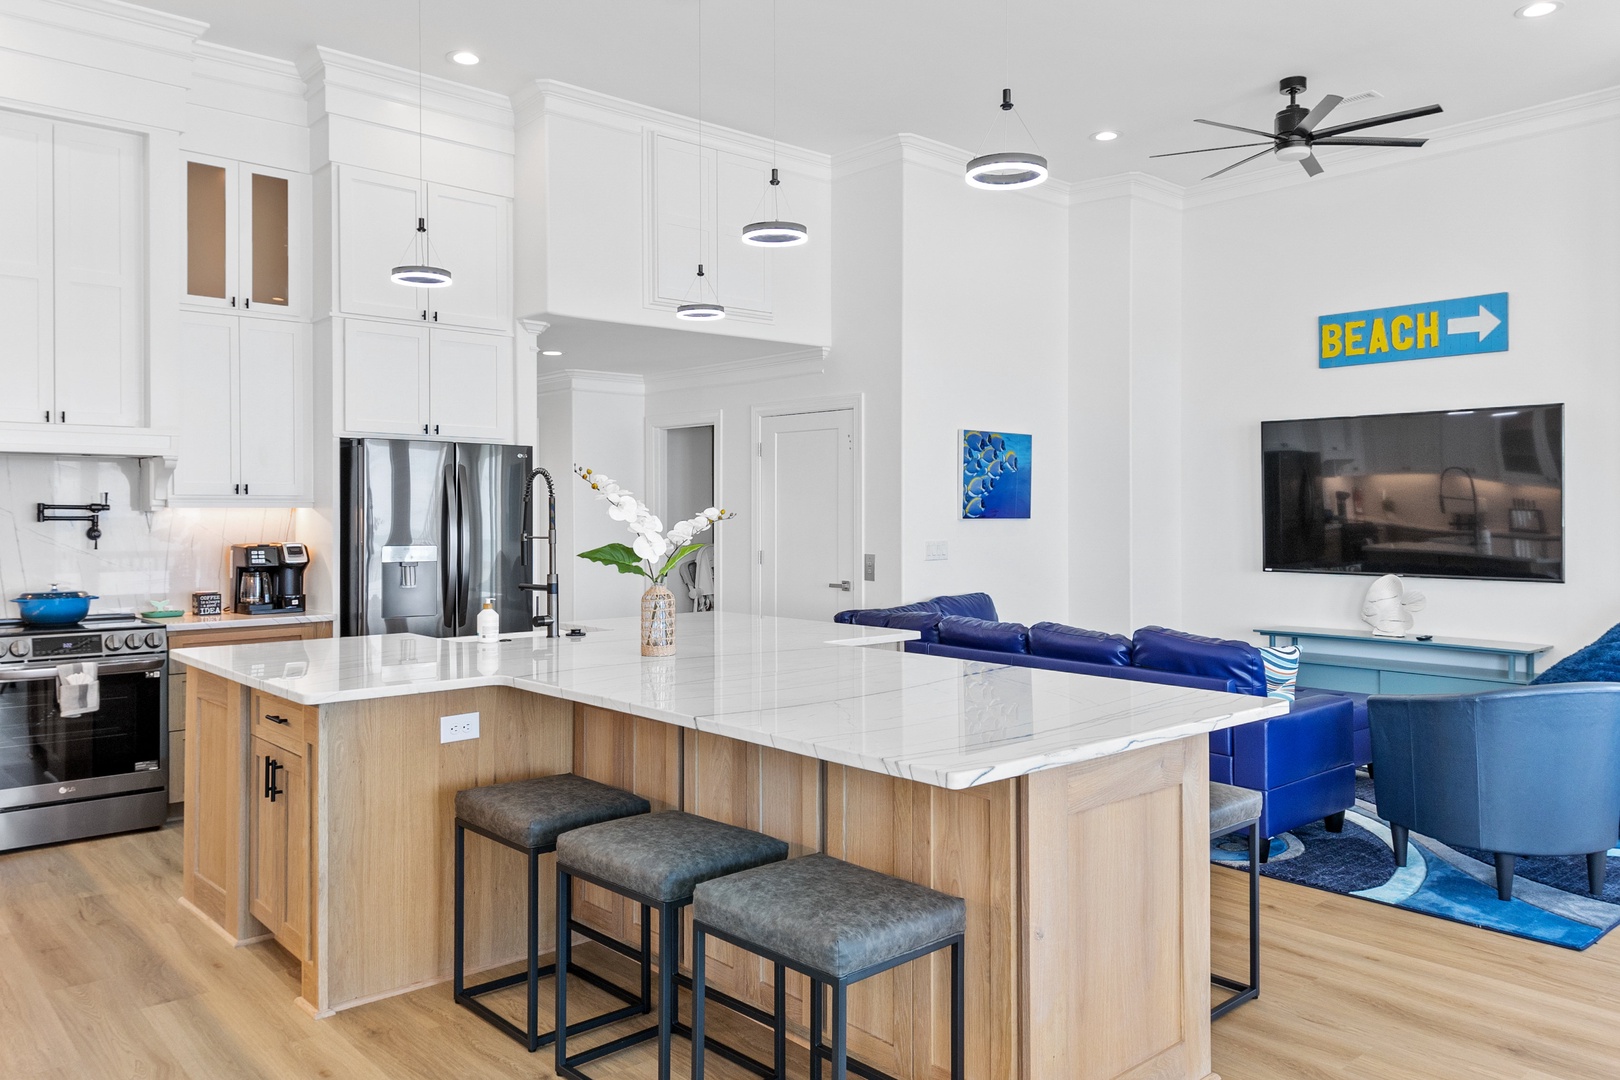 The well-stocked kitchen with countertop seating for 6